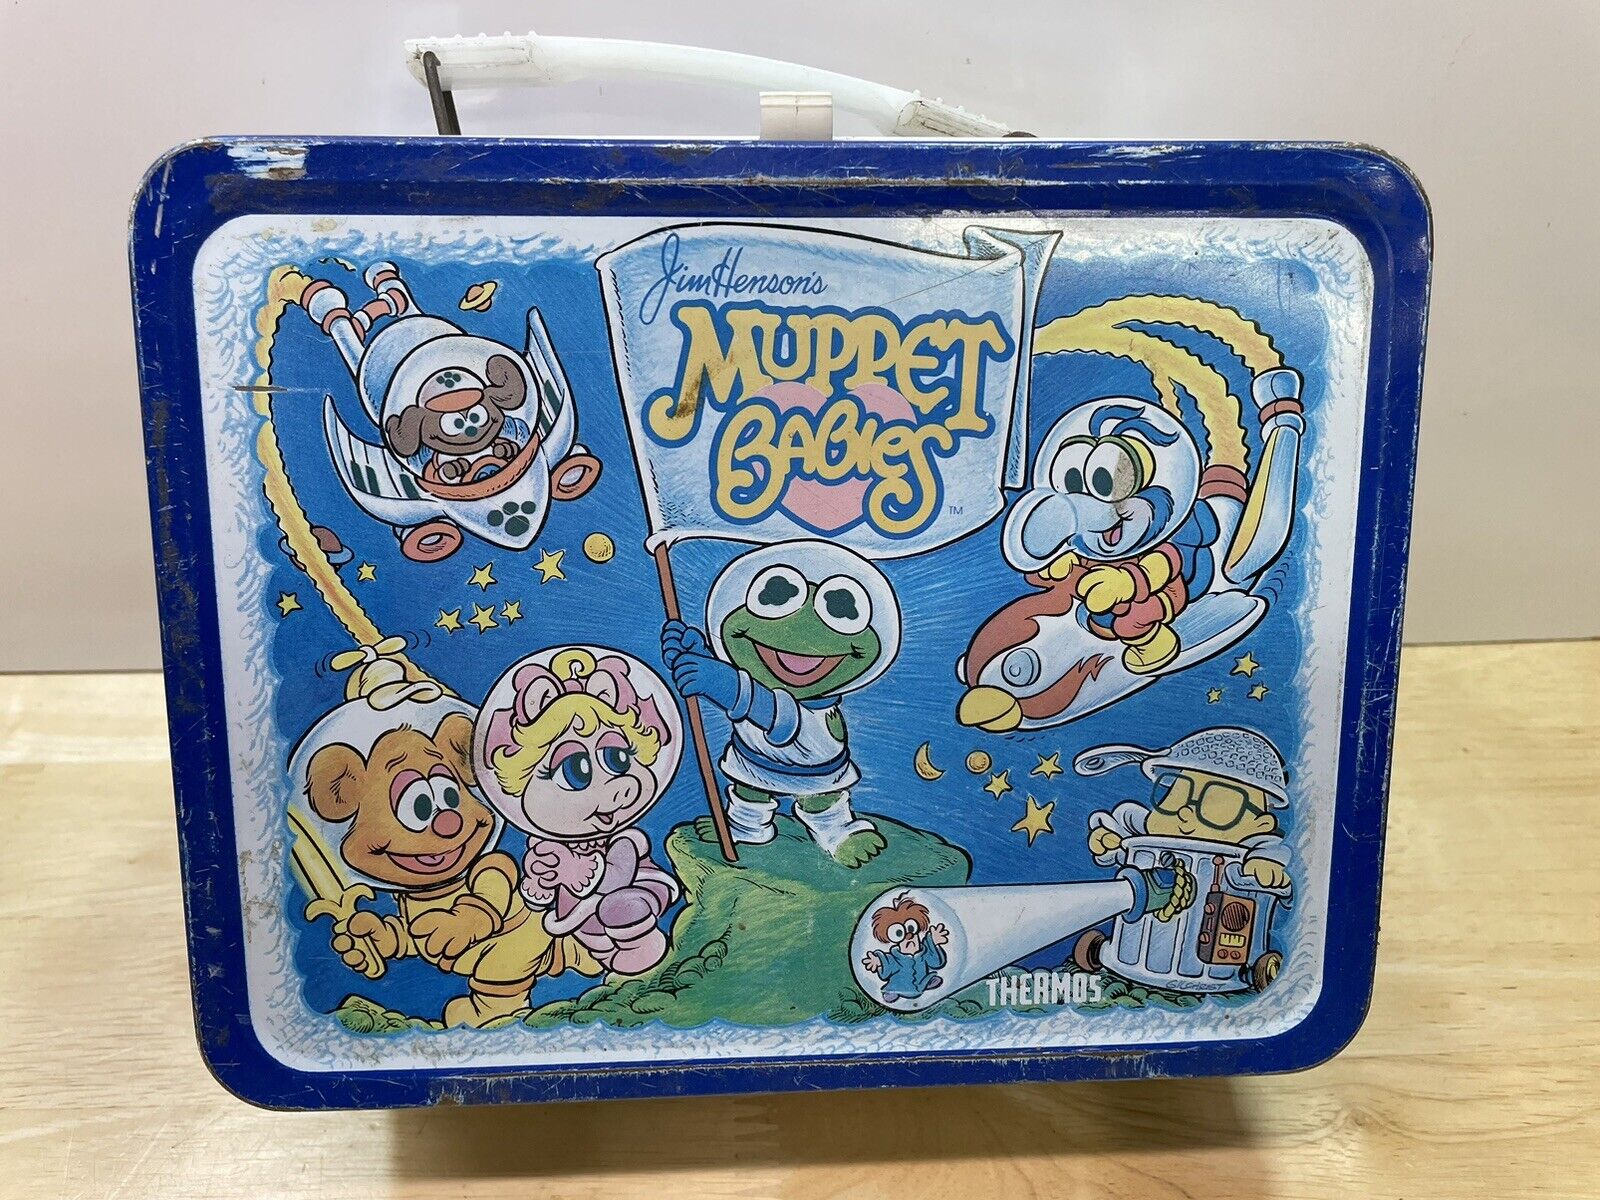 Jim Henson’s Muppet Babies Vintage 1985 Metal Lunch Box (No Thermos)